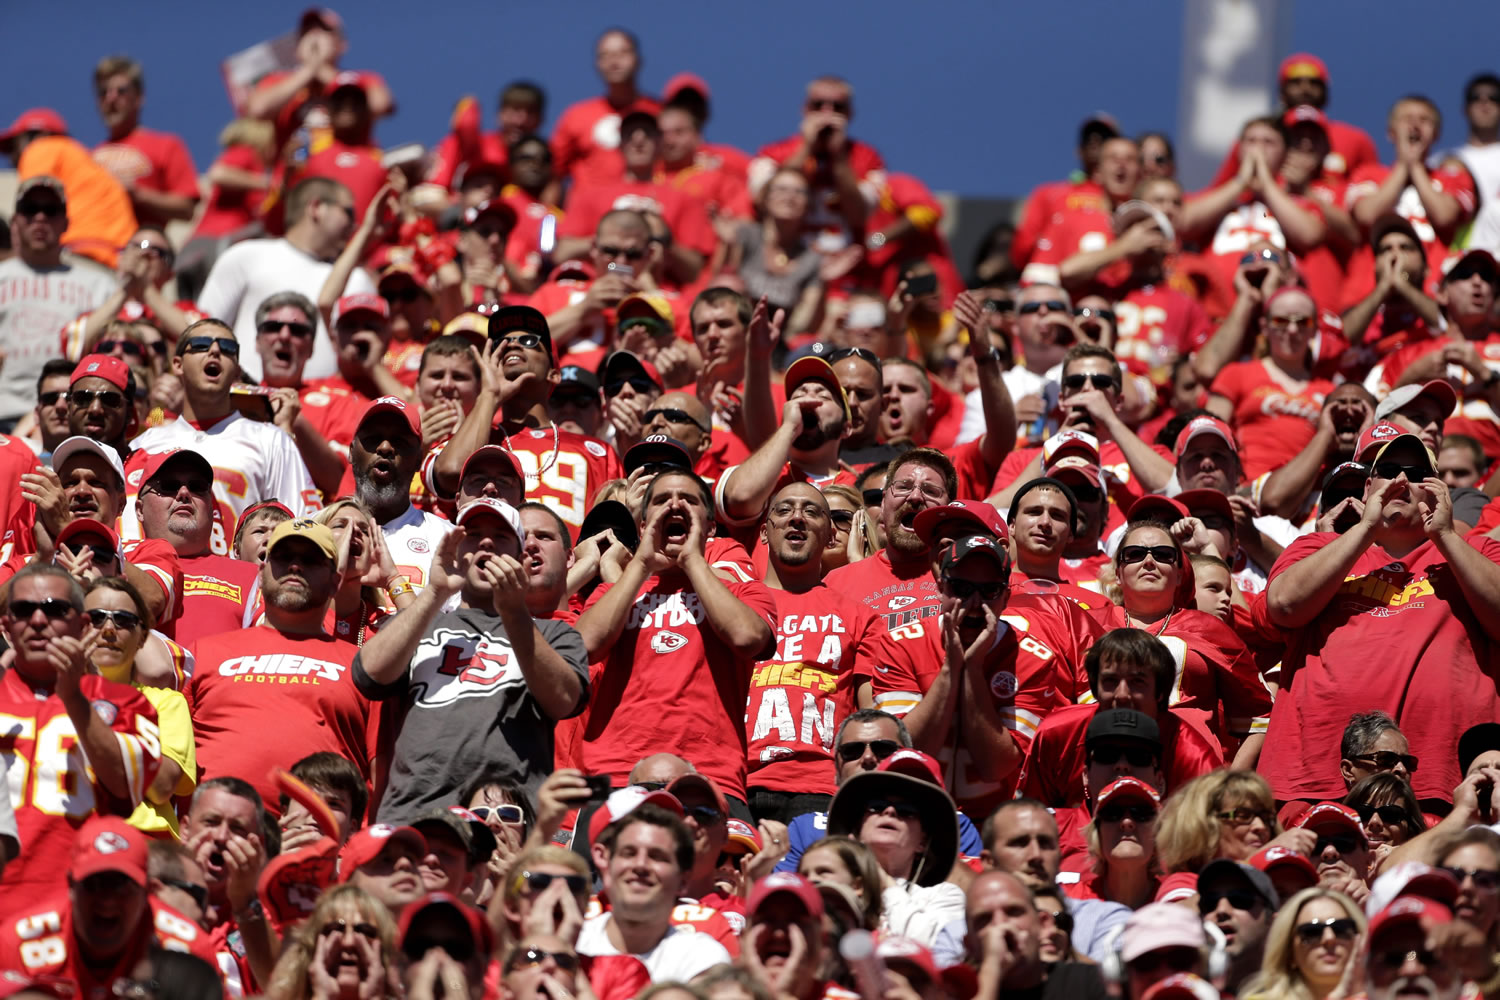 Kansas City Chiefs fans cheer during the second half of an NFL football game against the New York Giants  at Arrowhead Stadium in Kansas City, Mo., Sunday, Sept. 29, 2013.